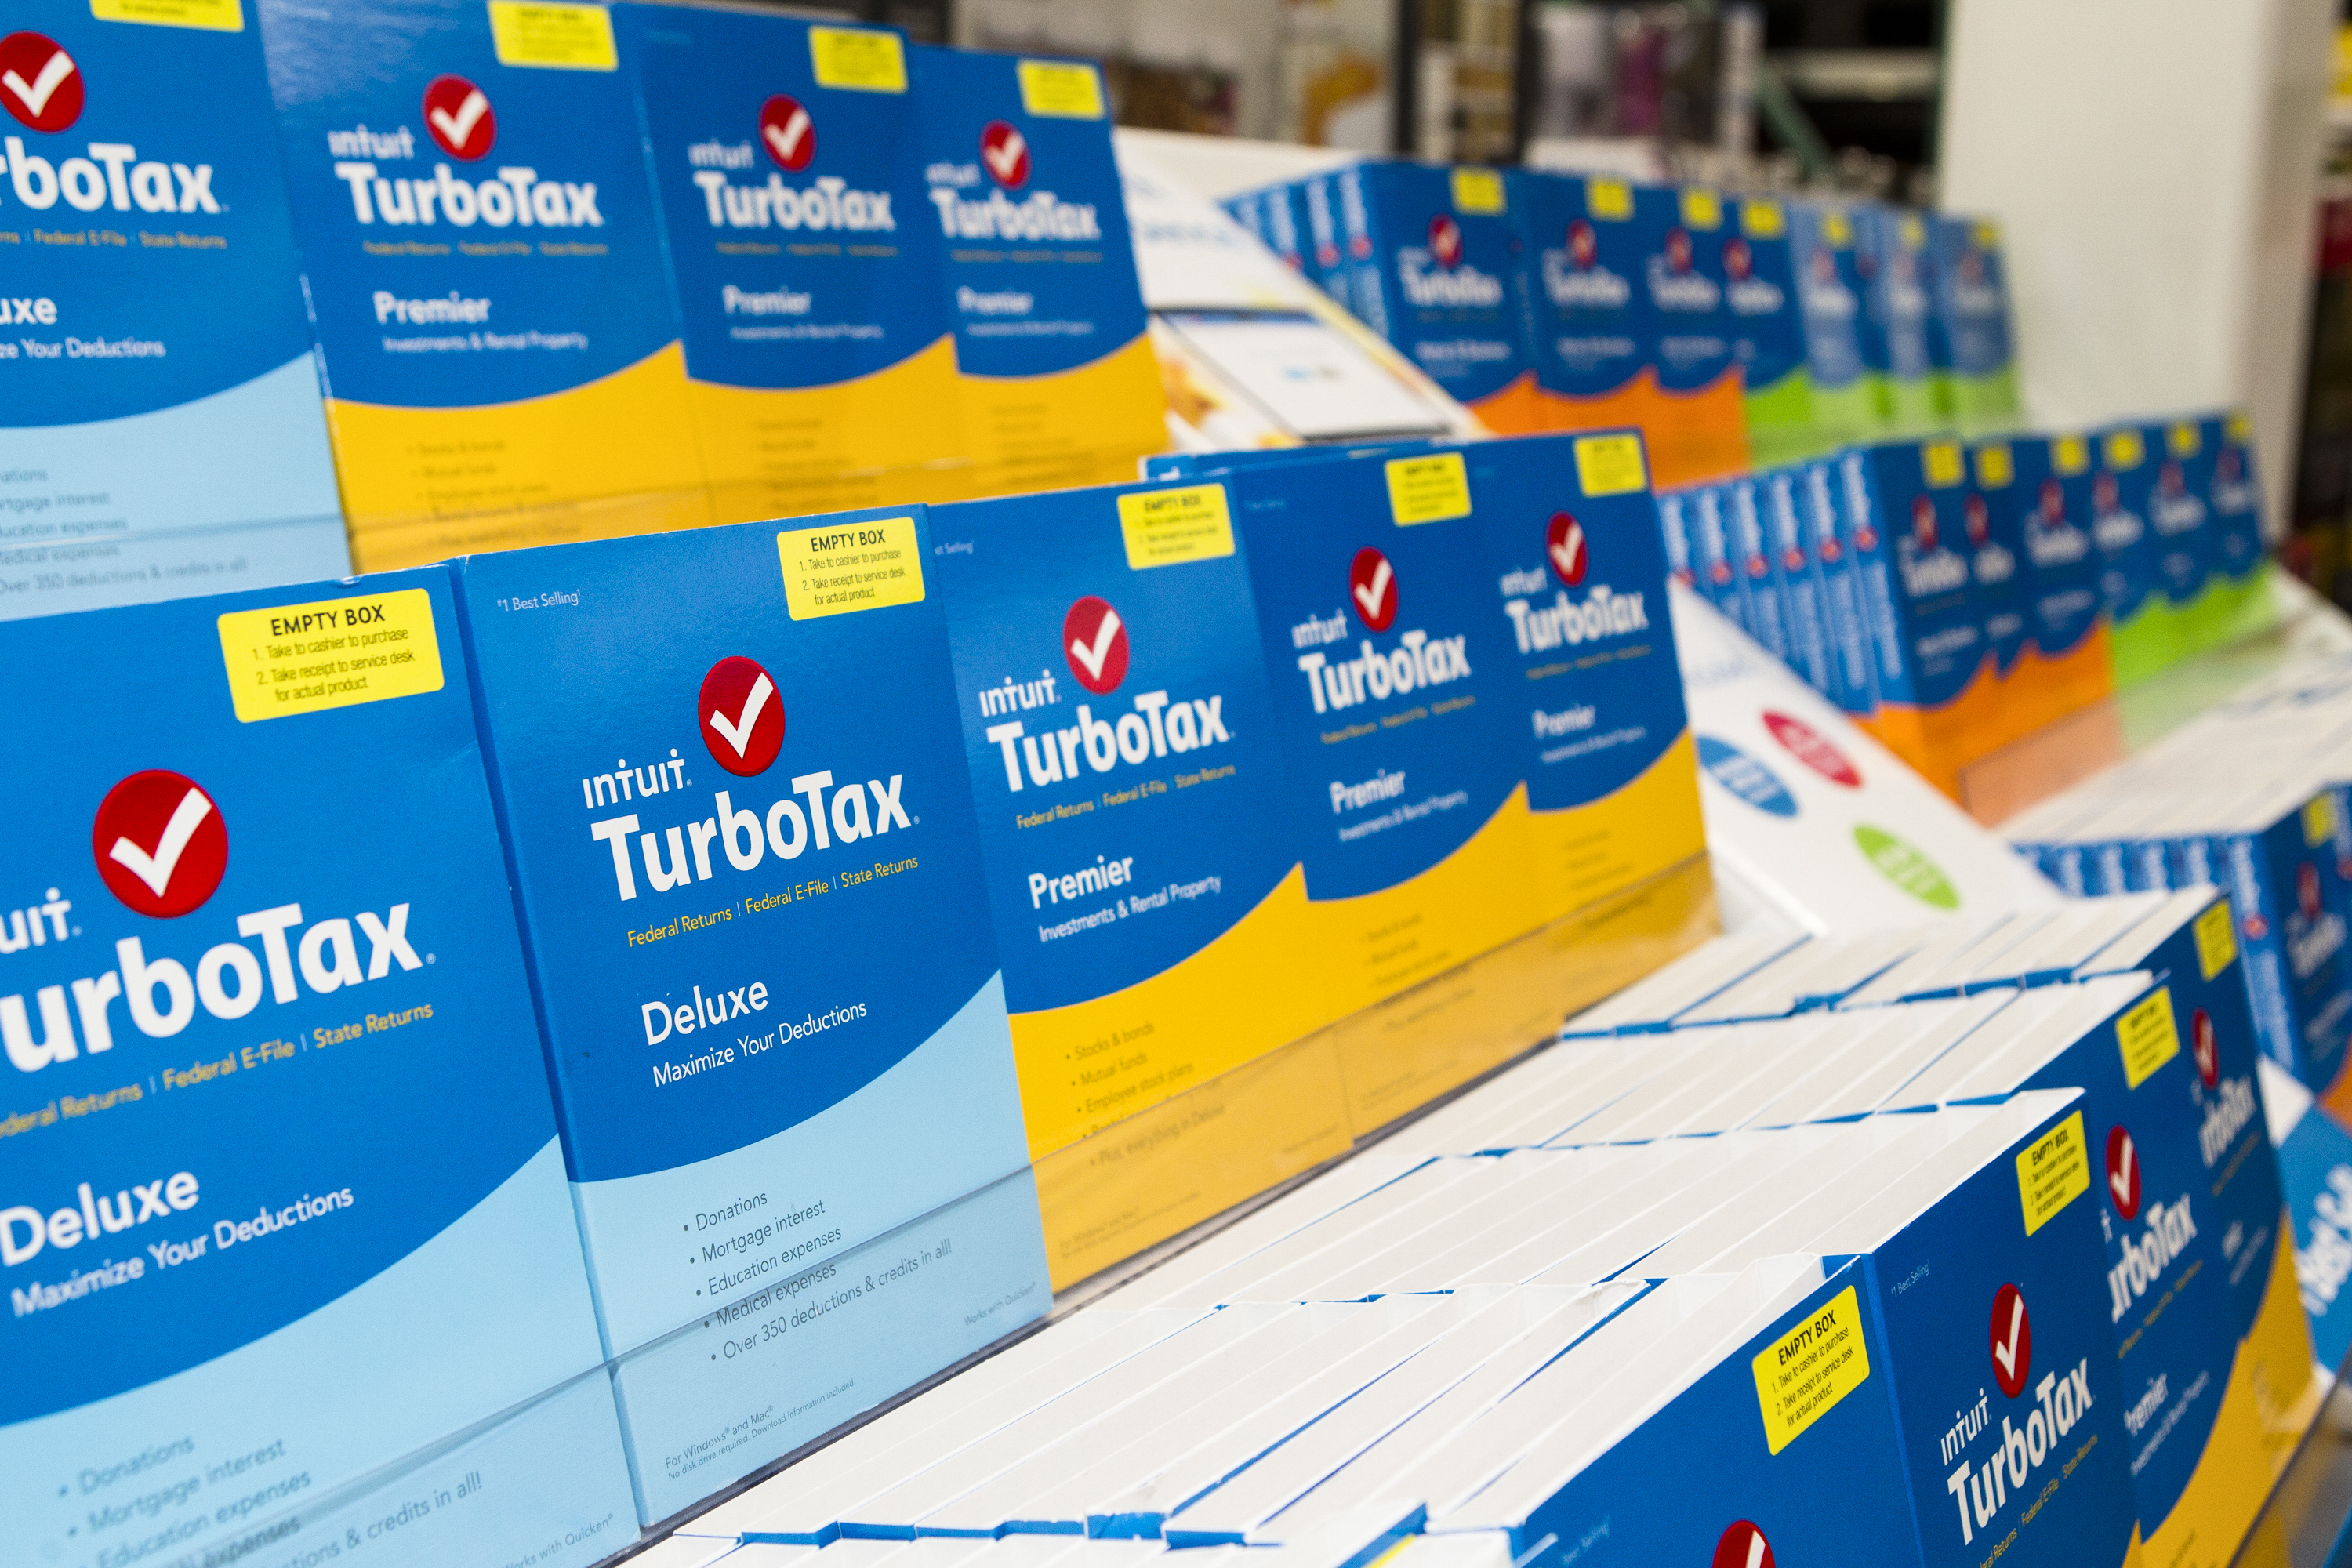 turbotax home & business 2016 cd for windows and mac